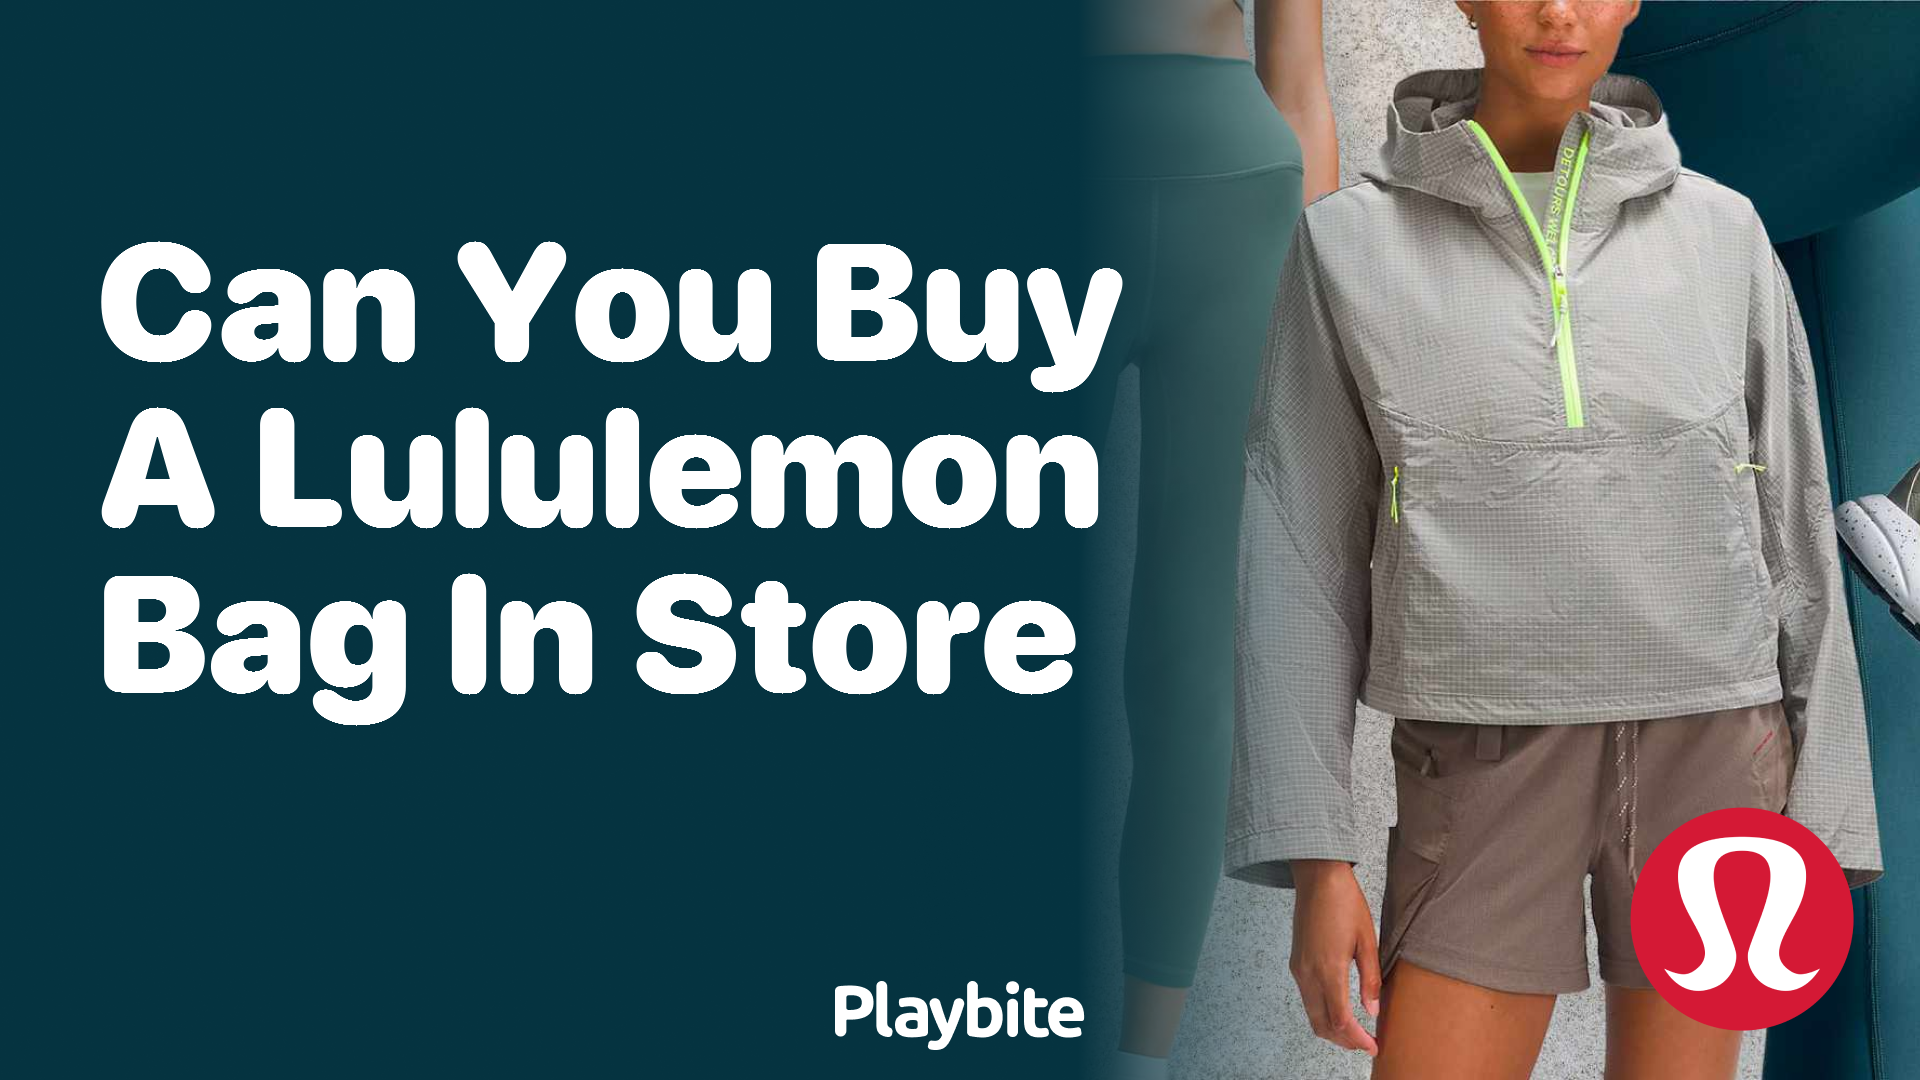 Can You Buy a Lululemon Bag in Store? - Playbite